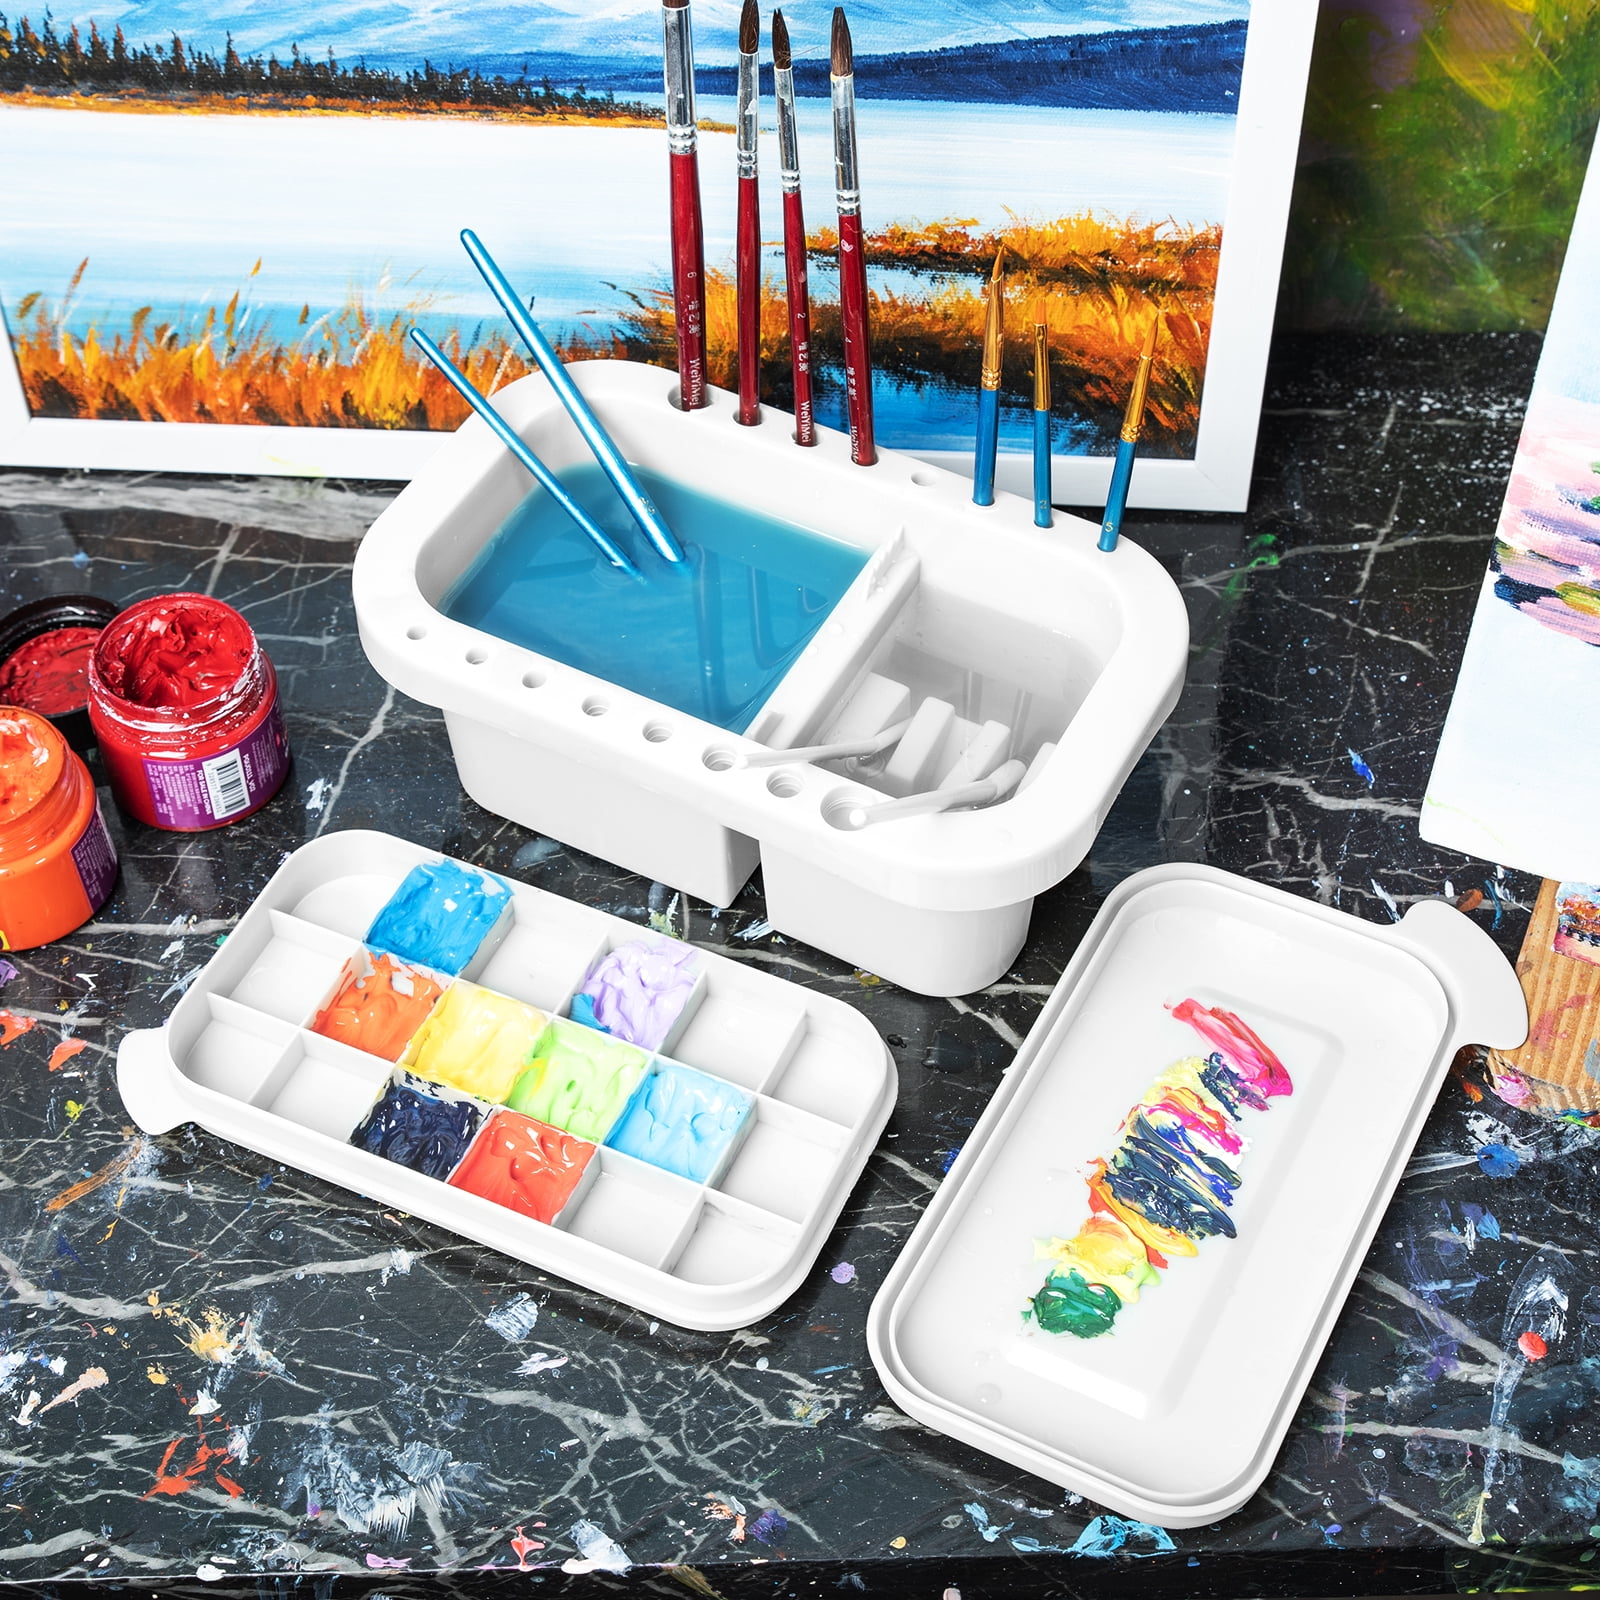 Wrapables Paint Brush Cleaner, Artist Paint Brush Holder with Palette Tray and Handle for Acrylic, Watercolor and Water-Based Paints